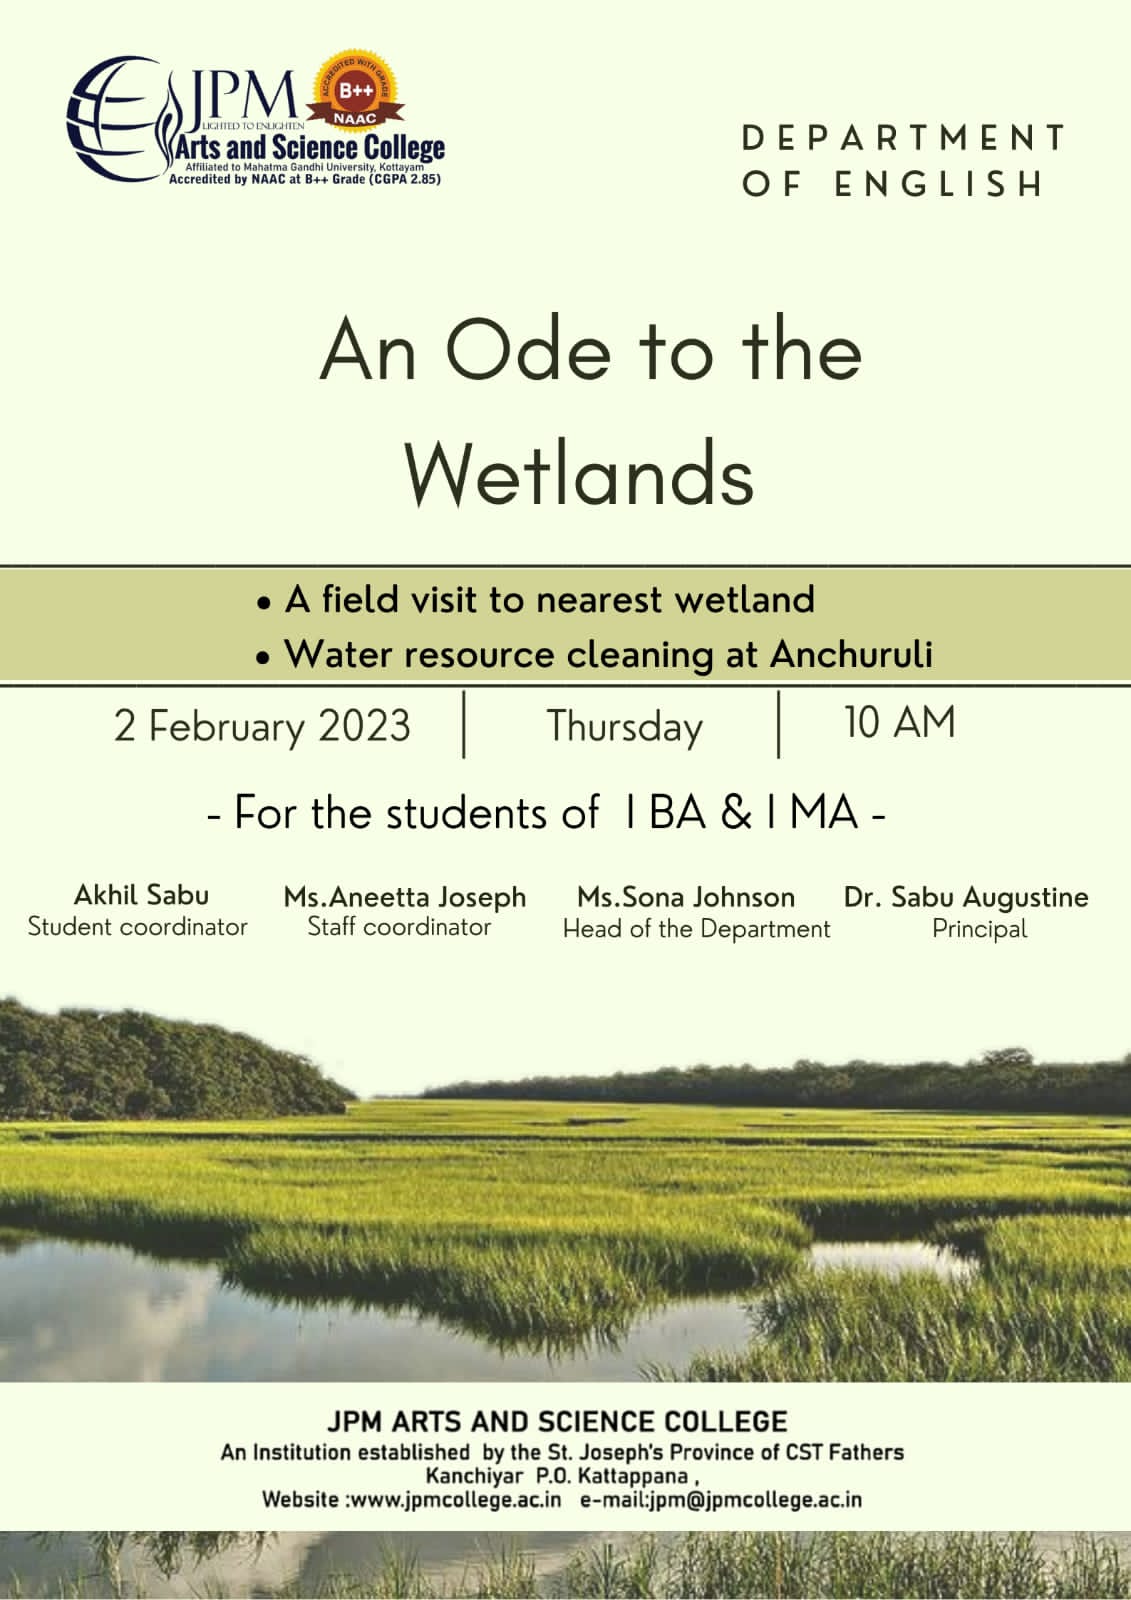 An Ode to the Wetlands